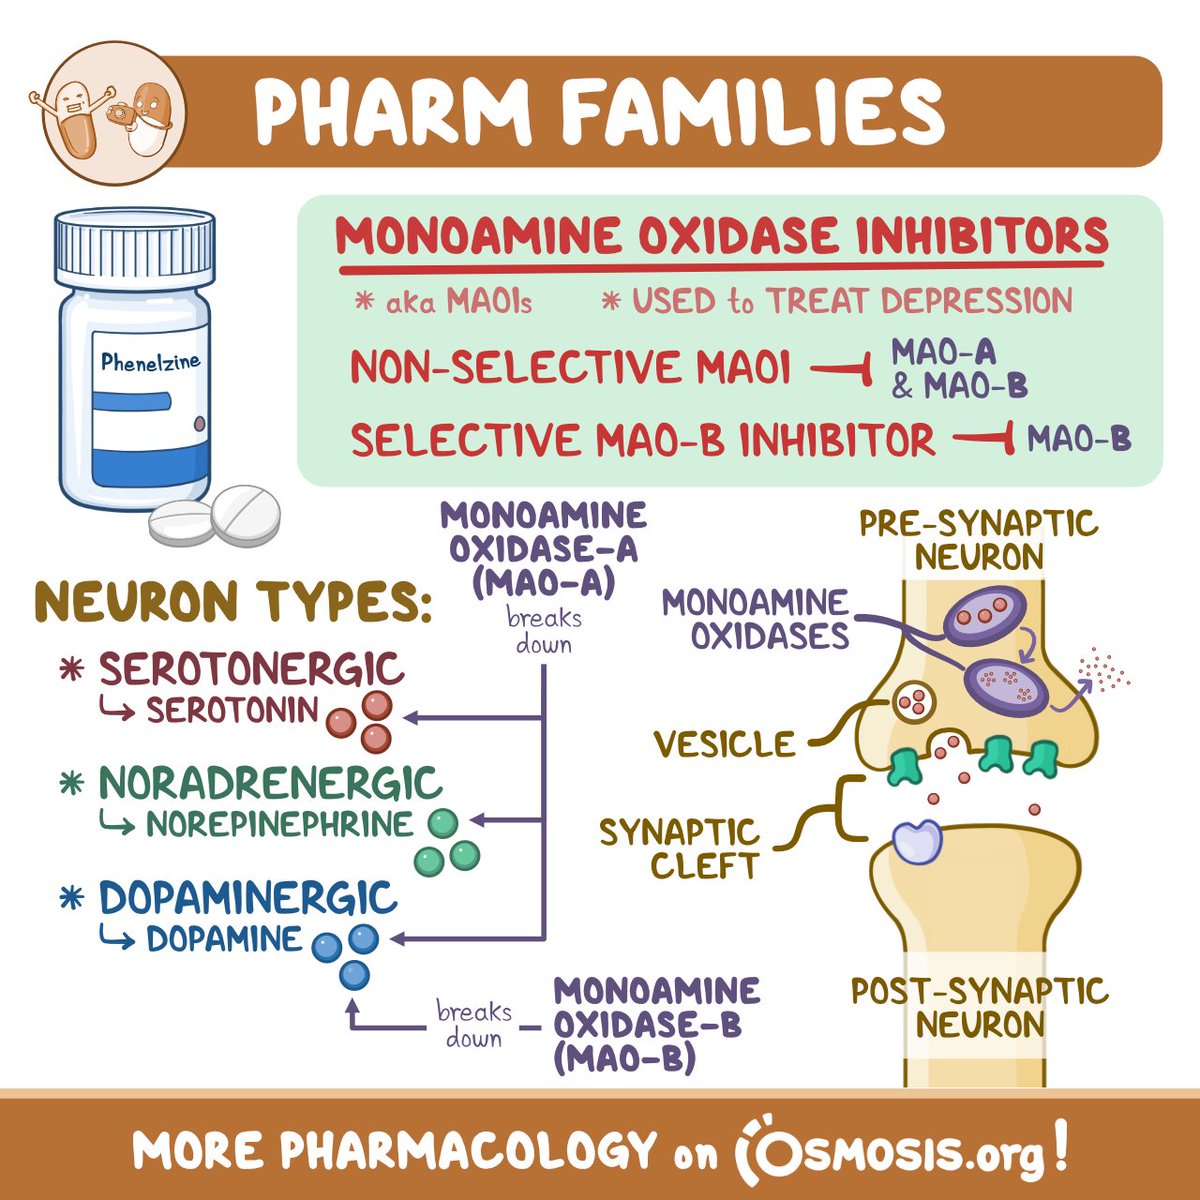 Today's #PharmFamilies is on monoamine oxidase inhibitors (MAOIs), a class of medications used in the treatment of #depression. Learn more: osms.it/pharm-maois-tw #LearnByOsmosis